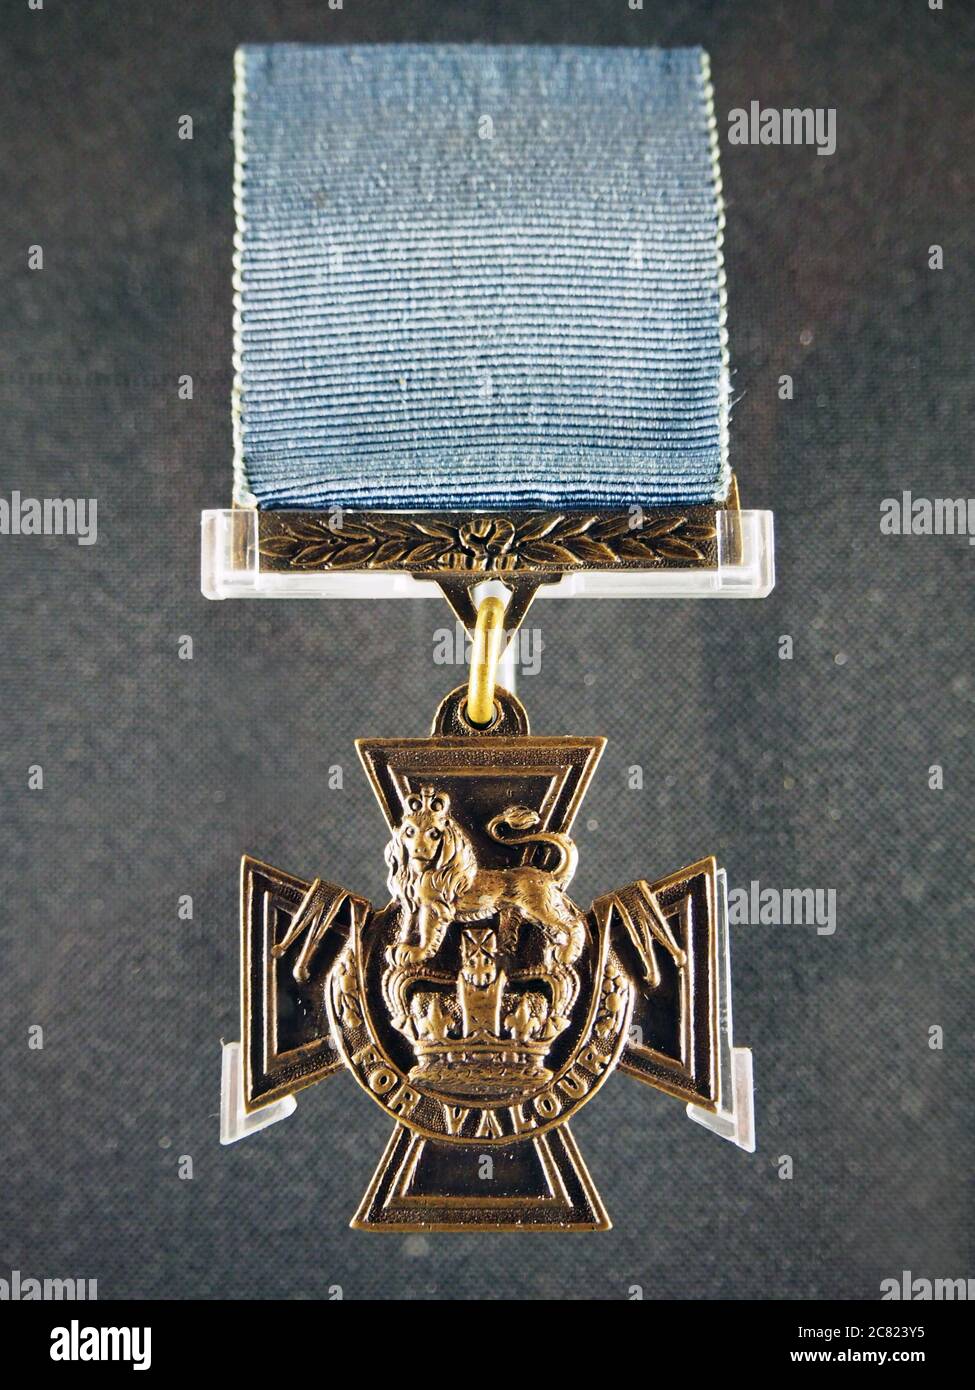 Victoria Cross with a rare Royal Navy blue ribbon, which was awarded to Able-Seaman William Neilson Edward Hall, on display at the Nova Scotia Museum, Stock Photo